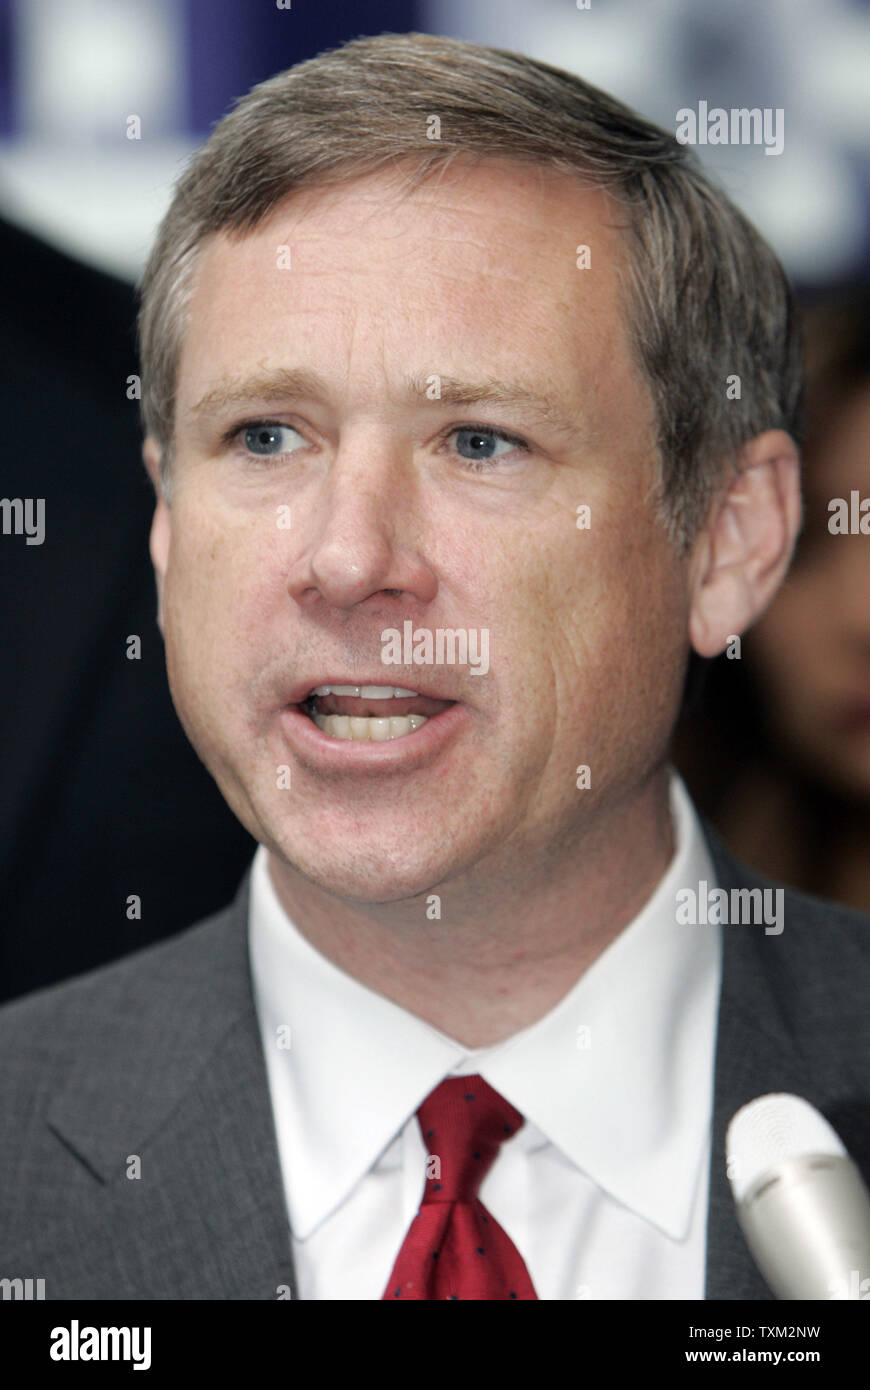 U.S. Senate candidate Mark Kirk (R-IL) speaks to supporters during a campaign stop with other members of the Illinois Republican ticket at Willard Airport in Champaign, IL., November 1, 2010.  UPI Photo/Mark Cowan Stock Photo